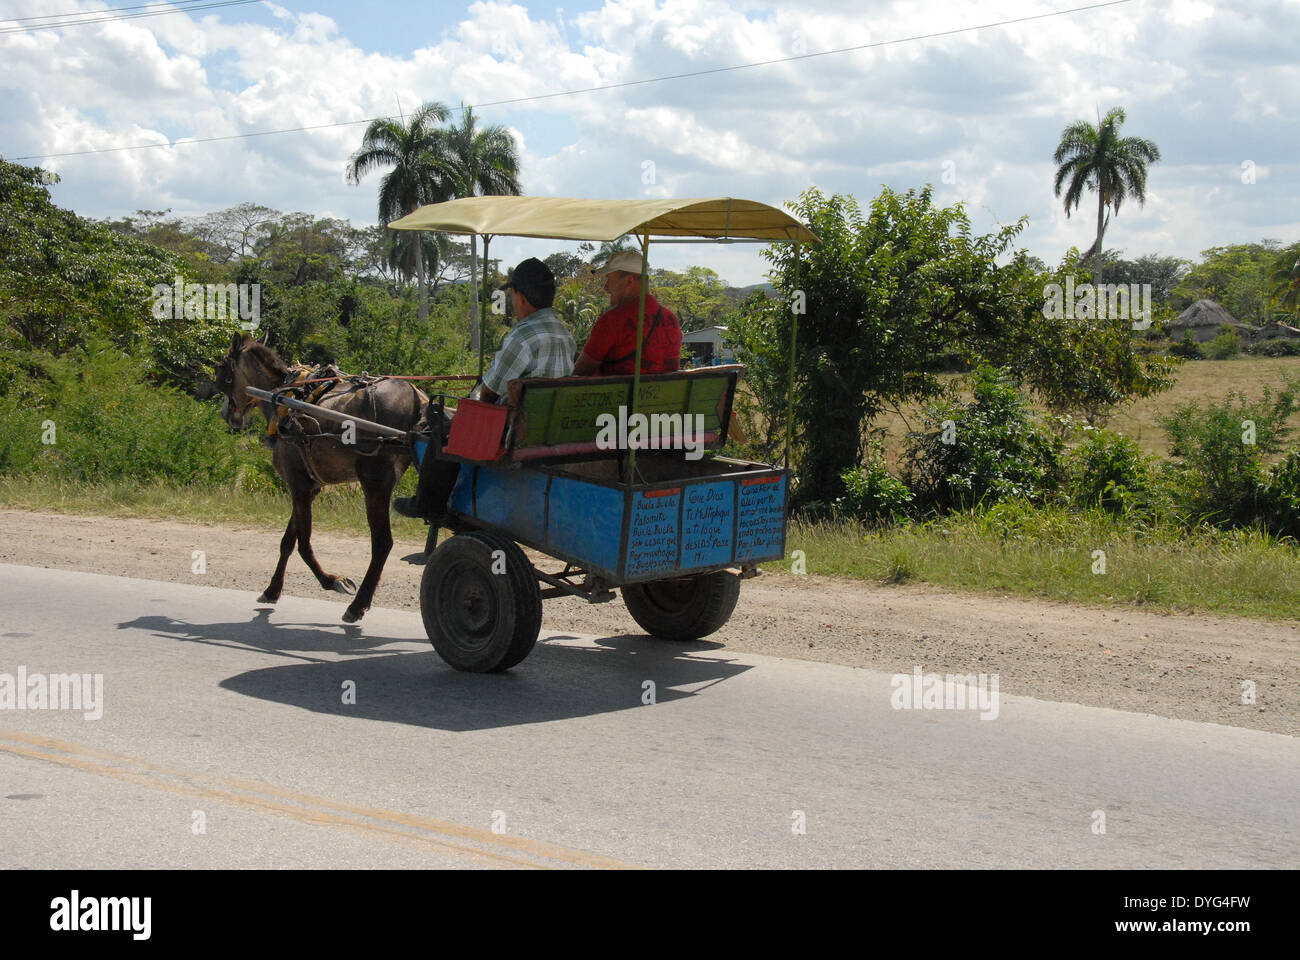 The typical local transport for the Cuban people in and around the city of Holguin. A horse and cart with sun shade. Stock Photo